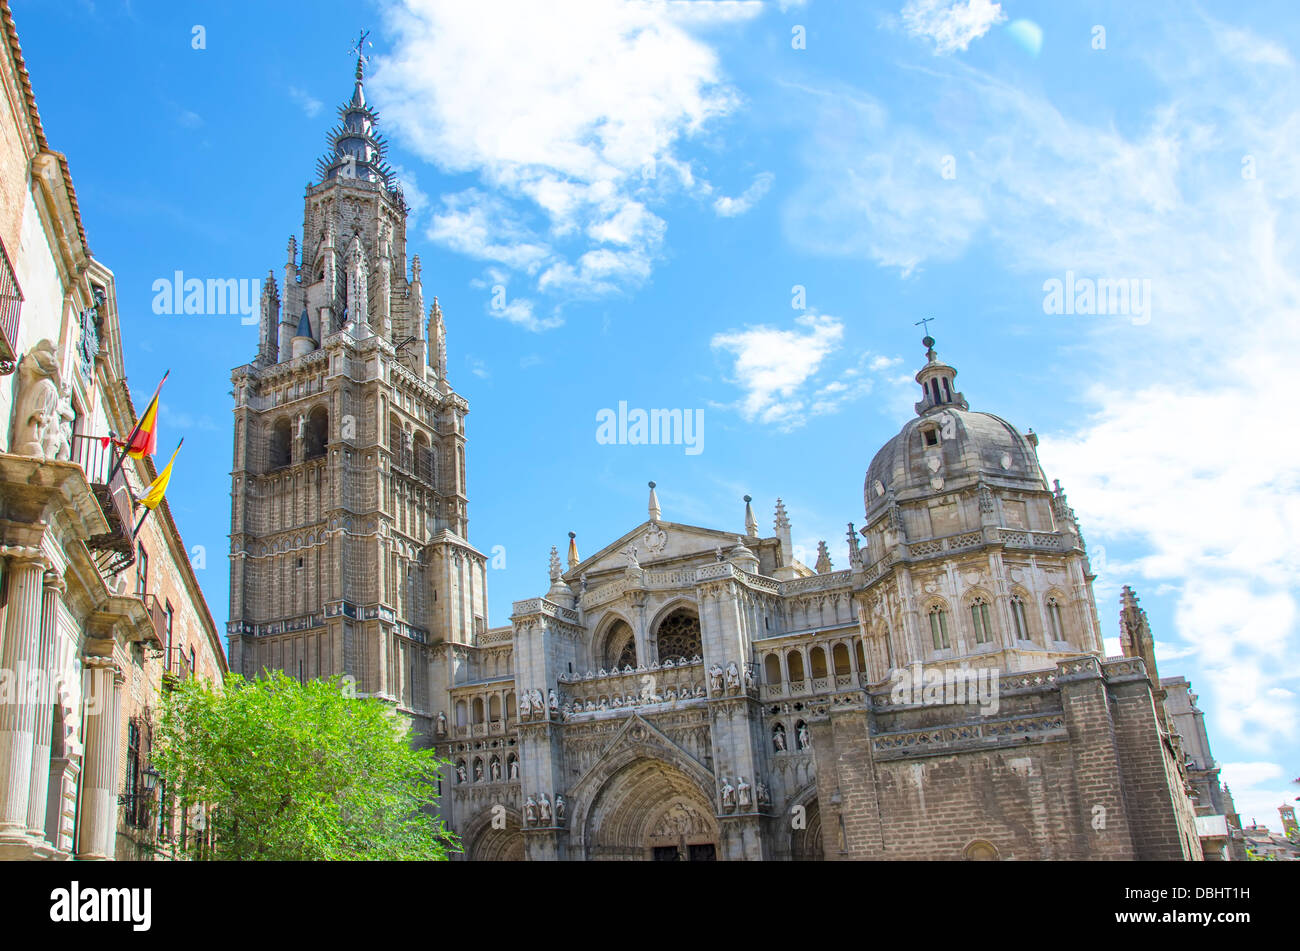 Tower and facade of the Cathedral of Toledo, Spain Stock Photo